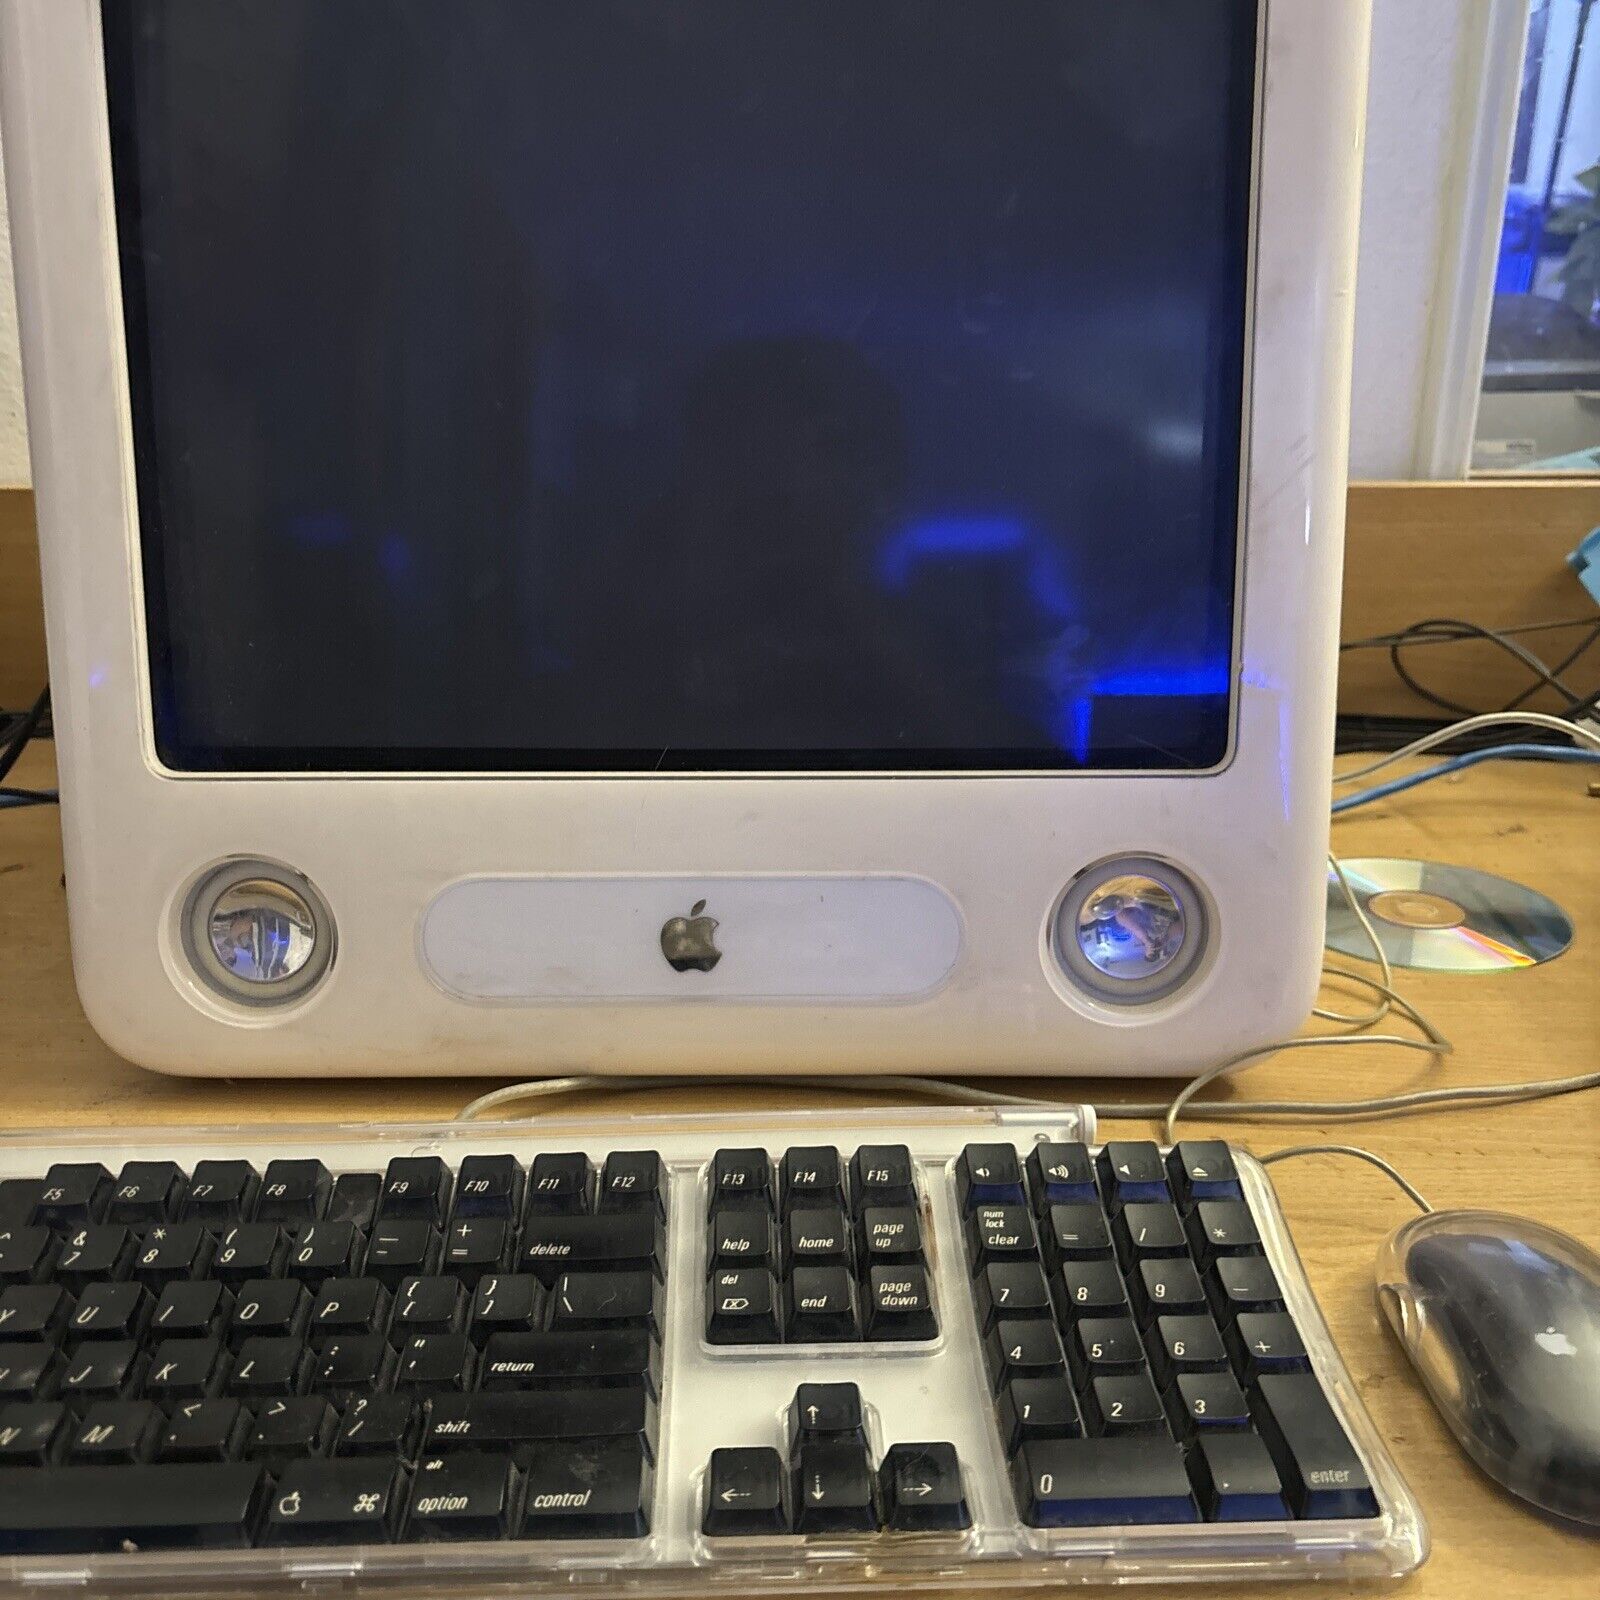 2002 Apple eMac Computer A1002 G4-700/256 MB/40 GB/Mac OS 9.2/ W/ Keyboard+Mouse